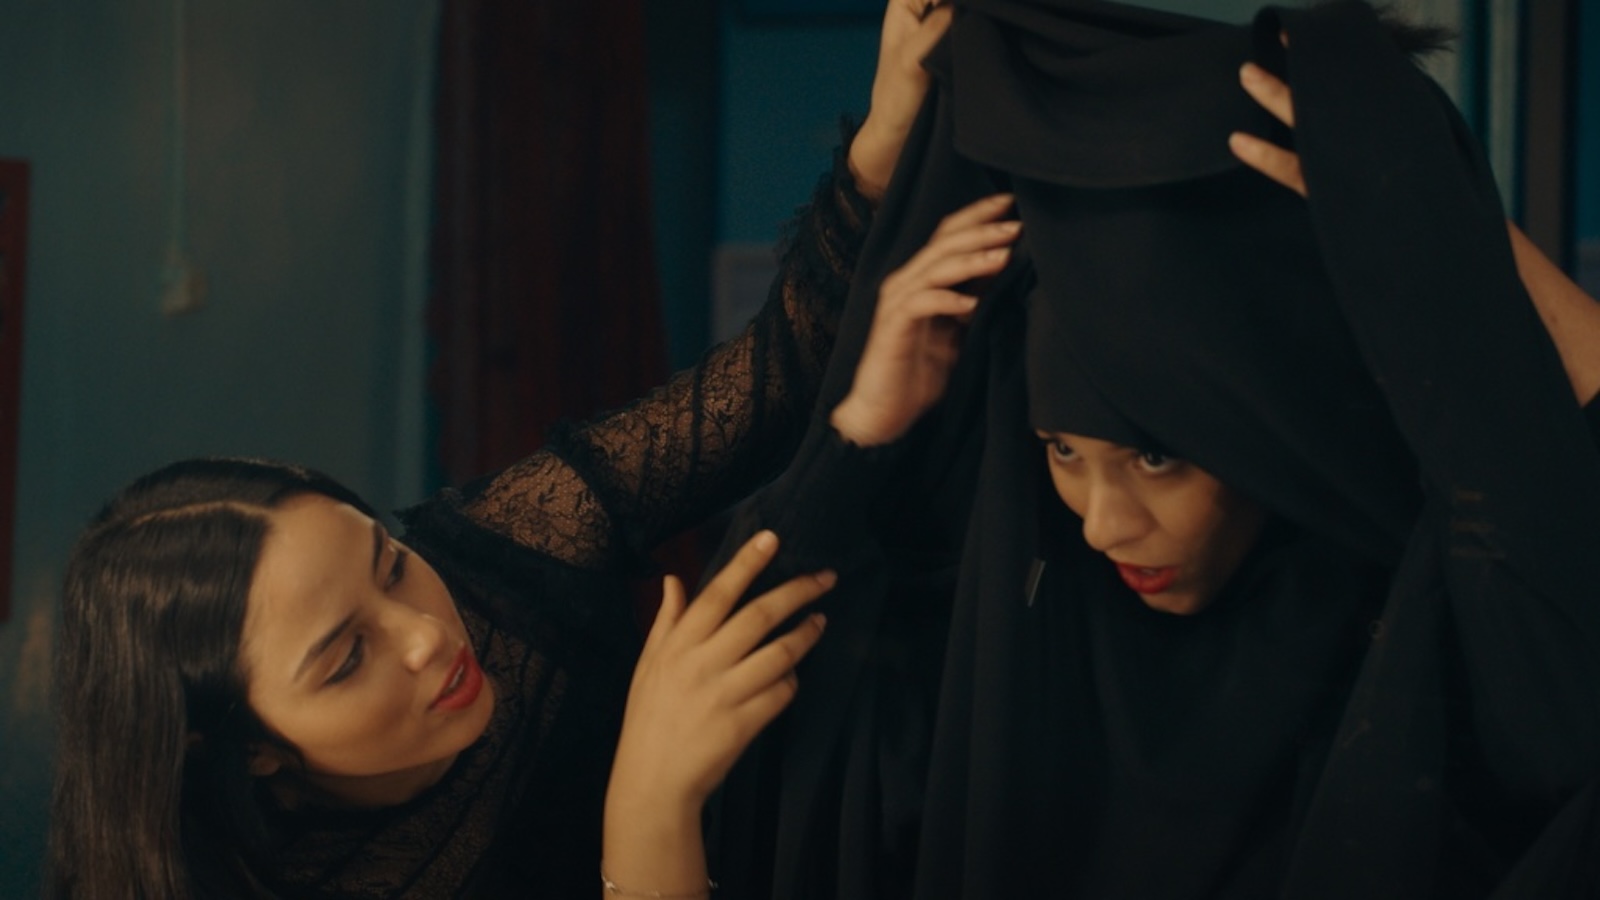 A woman helps another woman put on a black hijab.